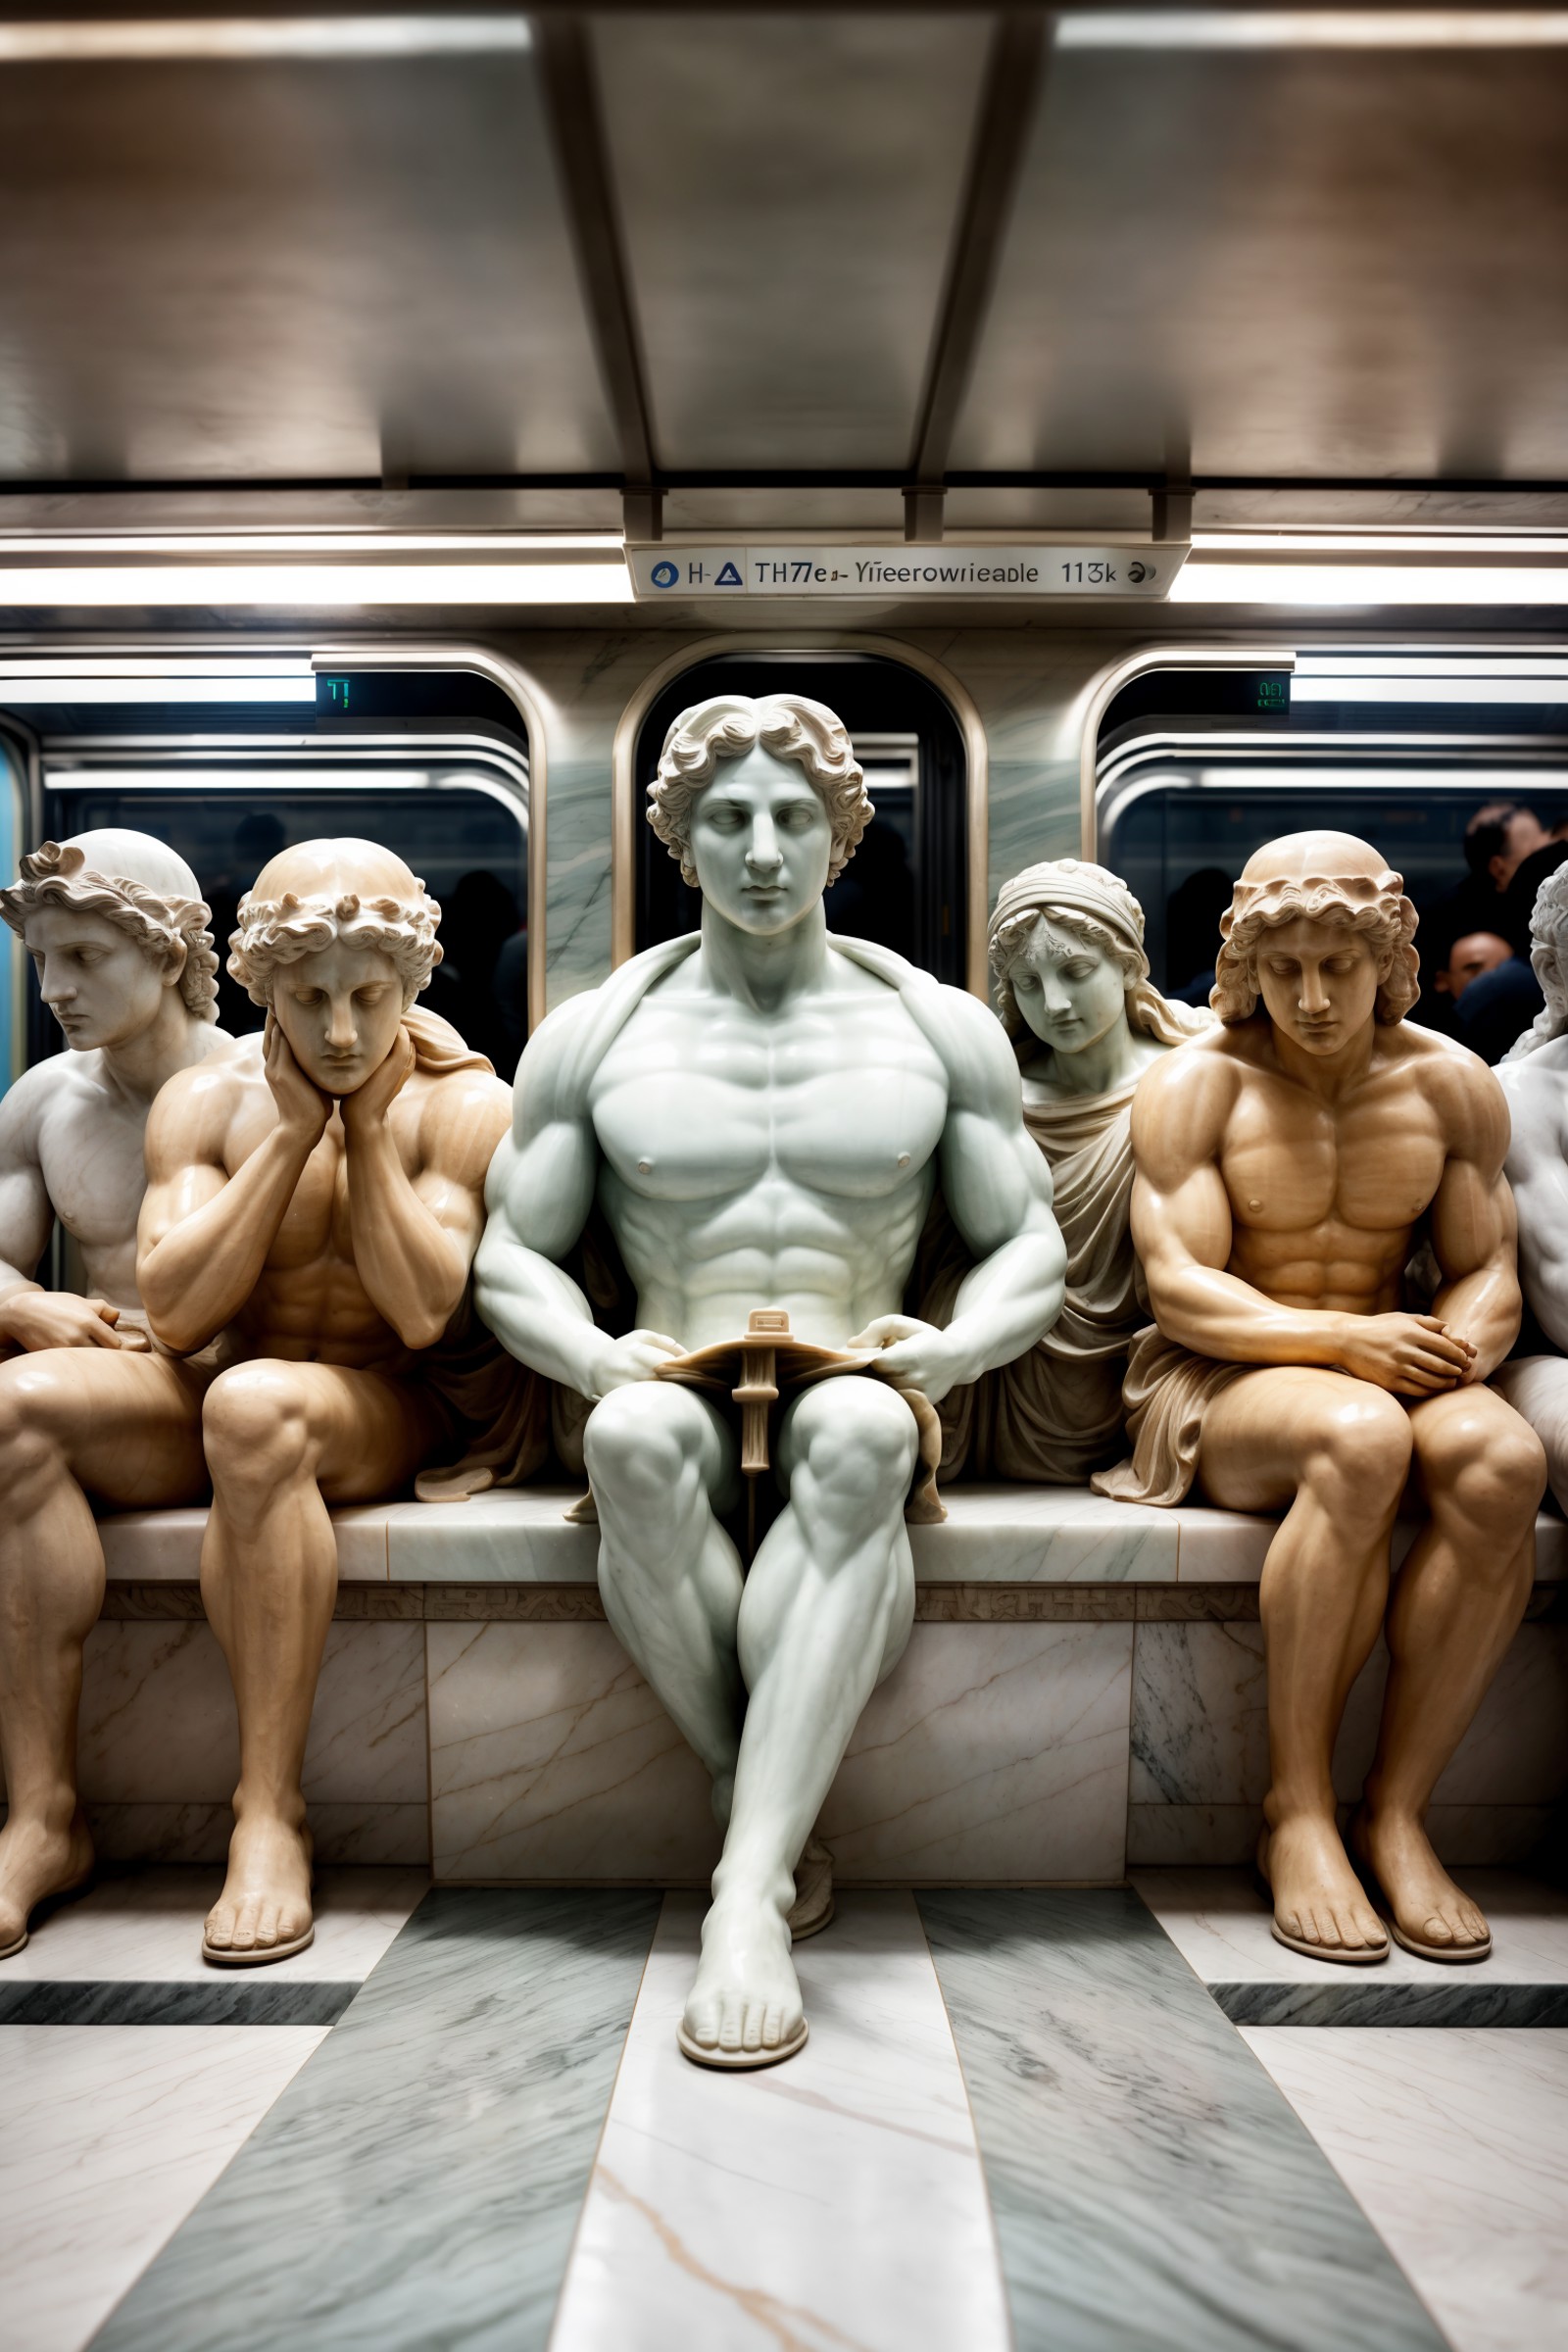 Wide angle hyper-realistic sculpture, (Greek marble statues in crowded subway:1.2), Chaotic composition, Sitting figures, ...